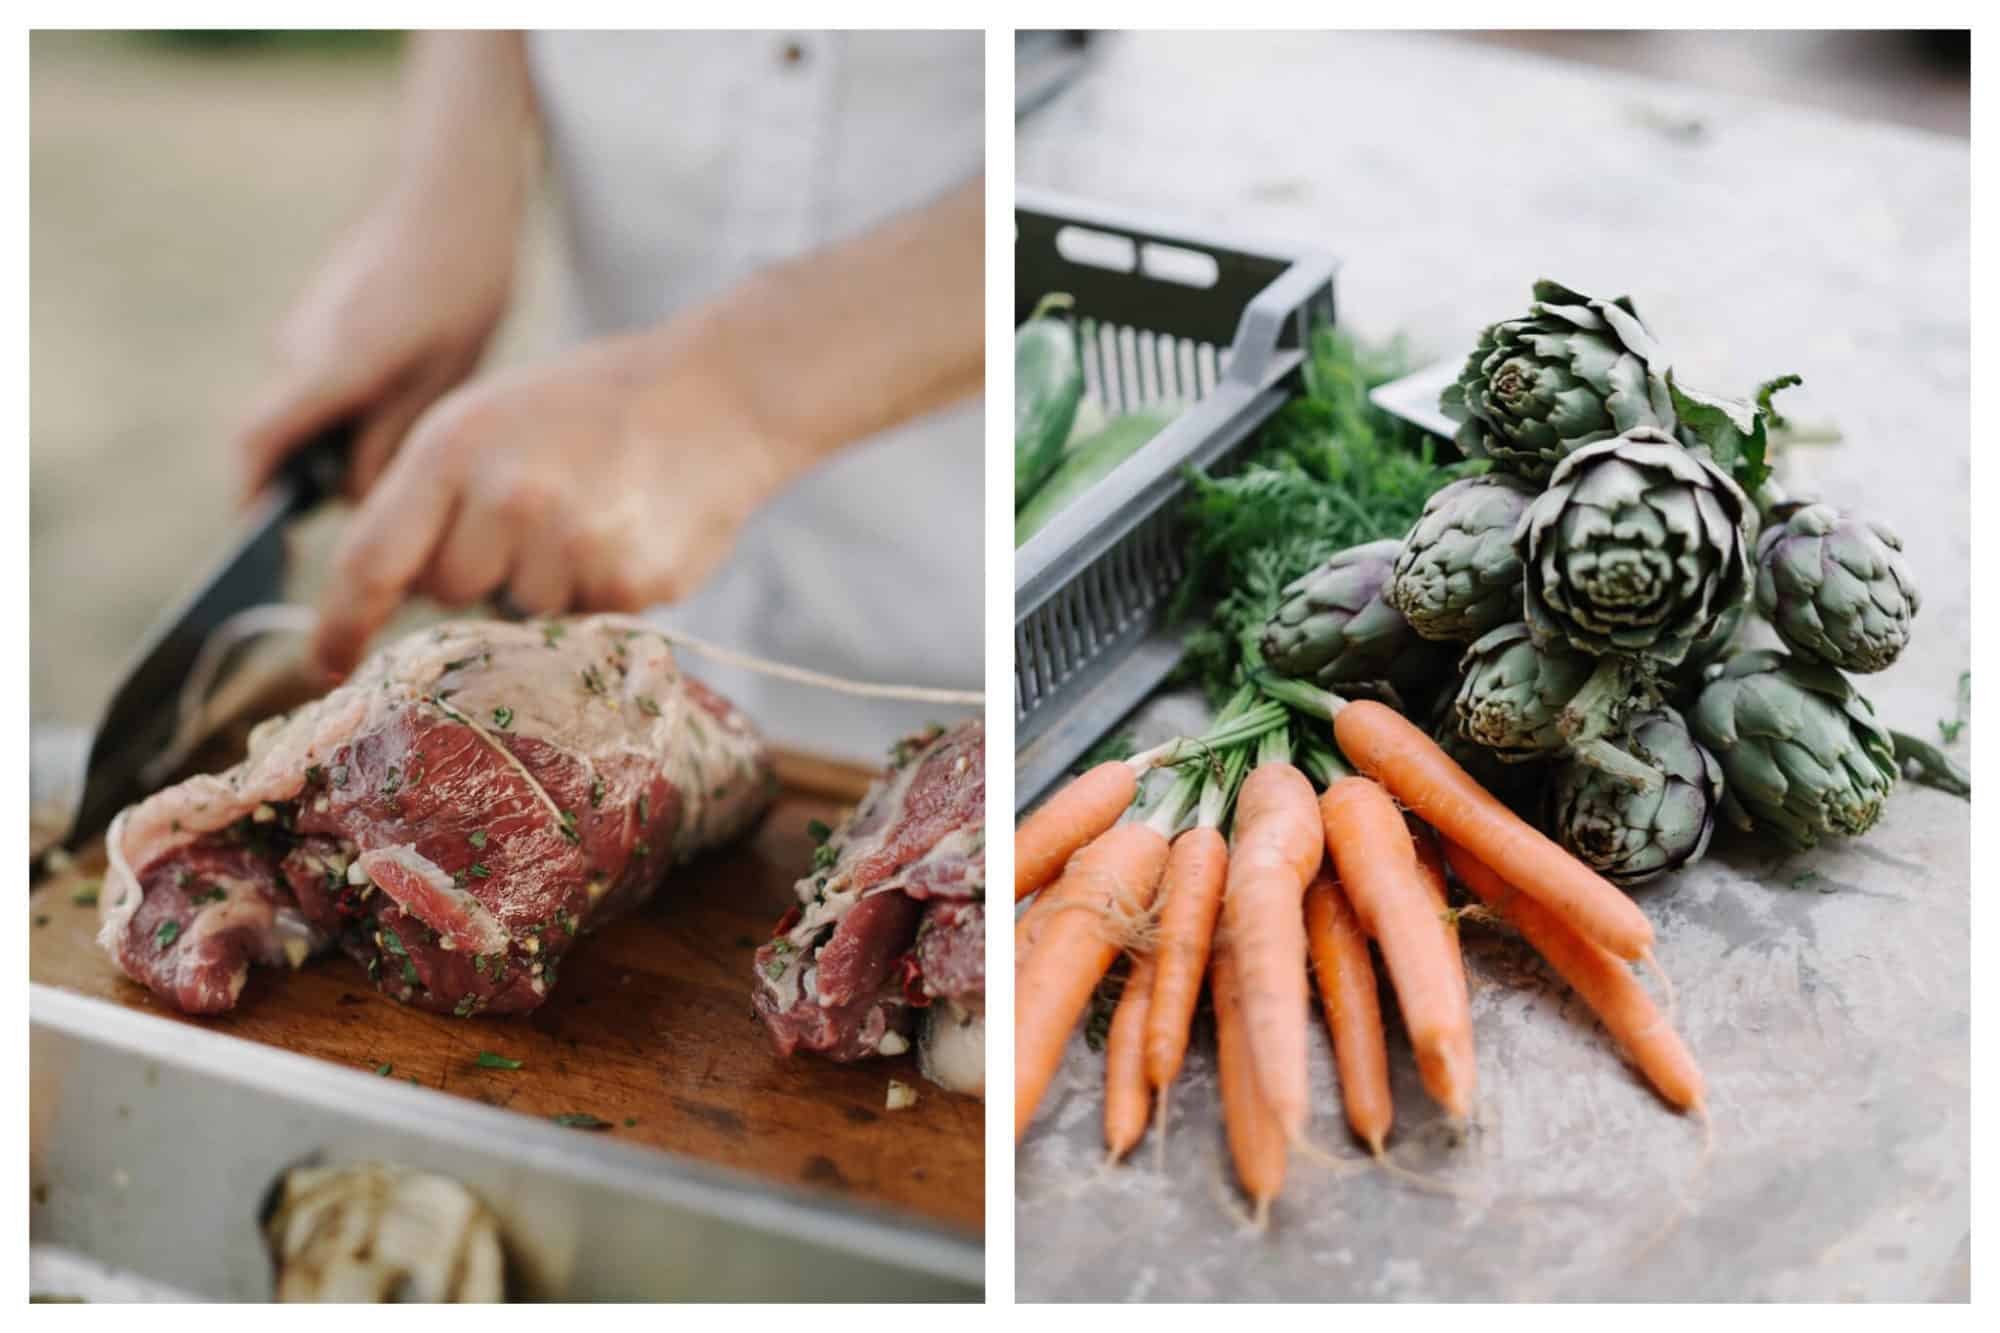 Left: A butcher slices a piece of fresh, seasoned raw meat with a butcher's cleaver, Right: Fresh produce, including carrots and artichokes, lay together on a flat surface.